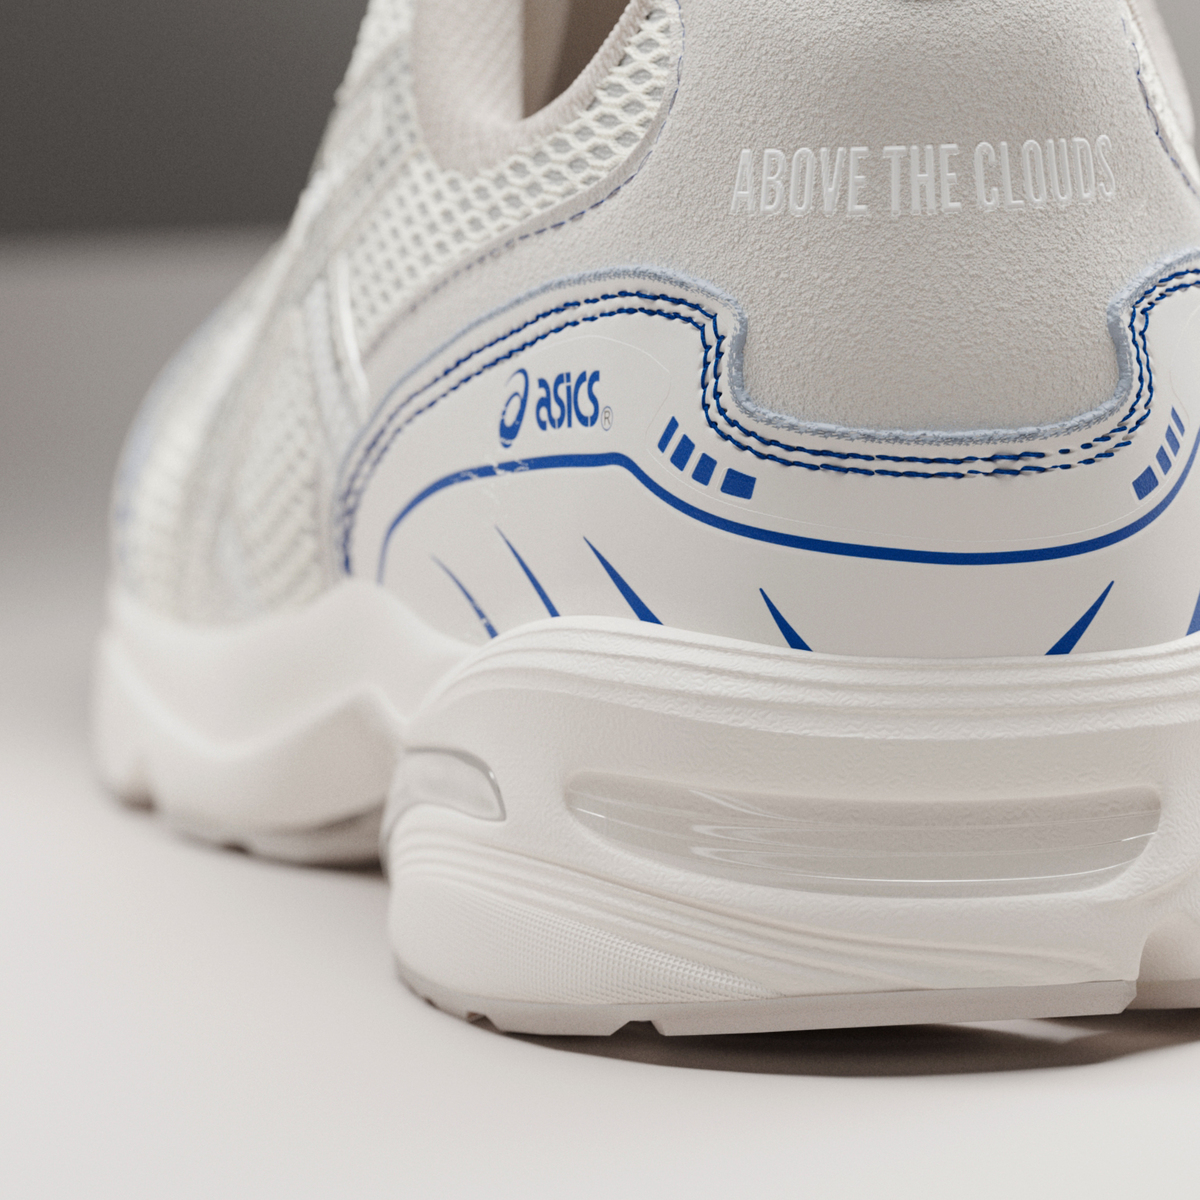 ASICS Gel-1090 x Above The Clouds Collaboration